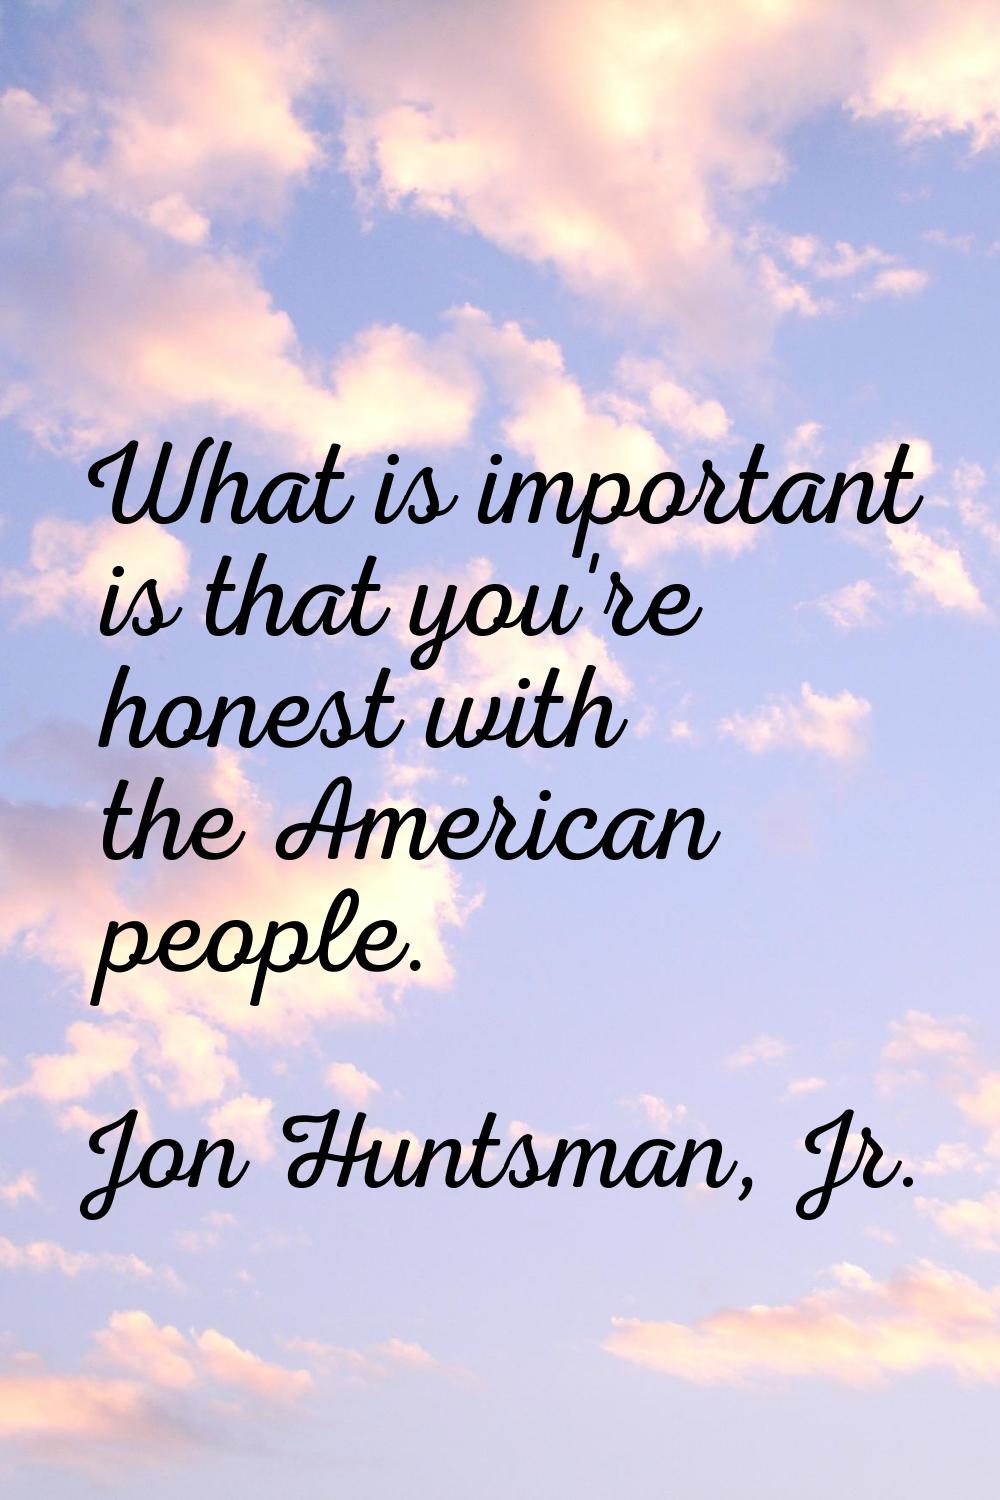 What is important is that you're honest with the American people.